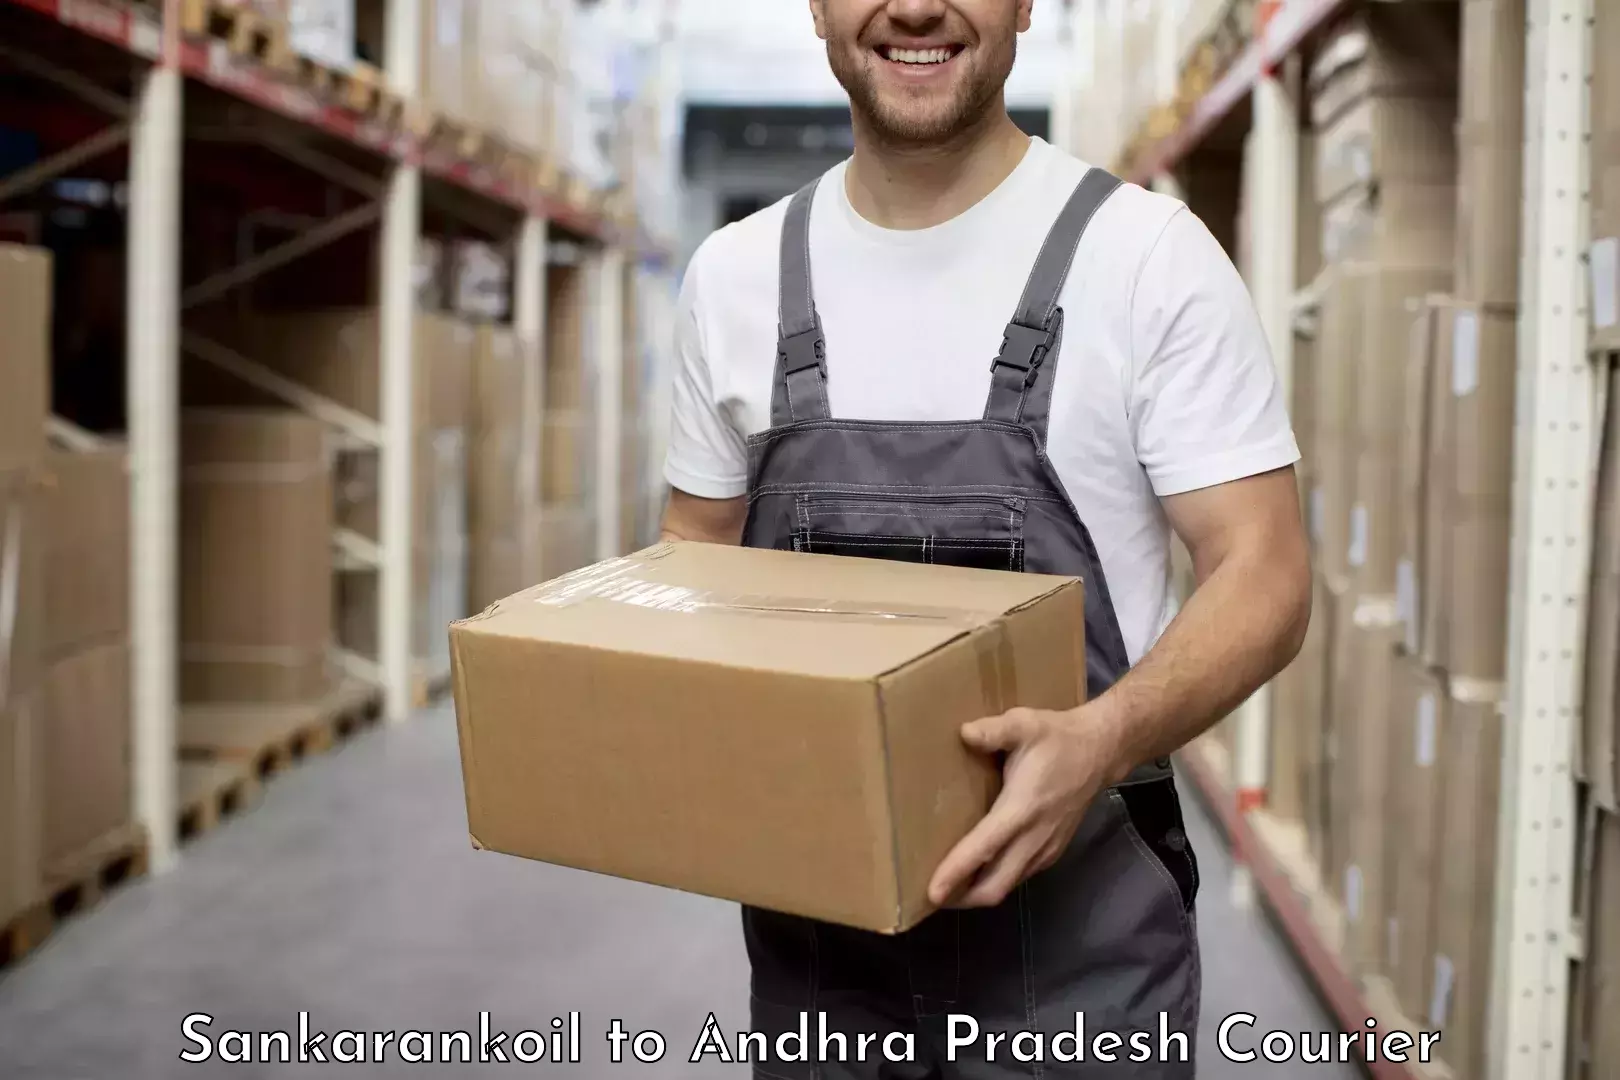 On-call courier service in Sankarankoil to Gajapathinagaram